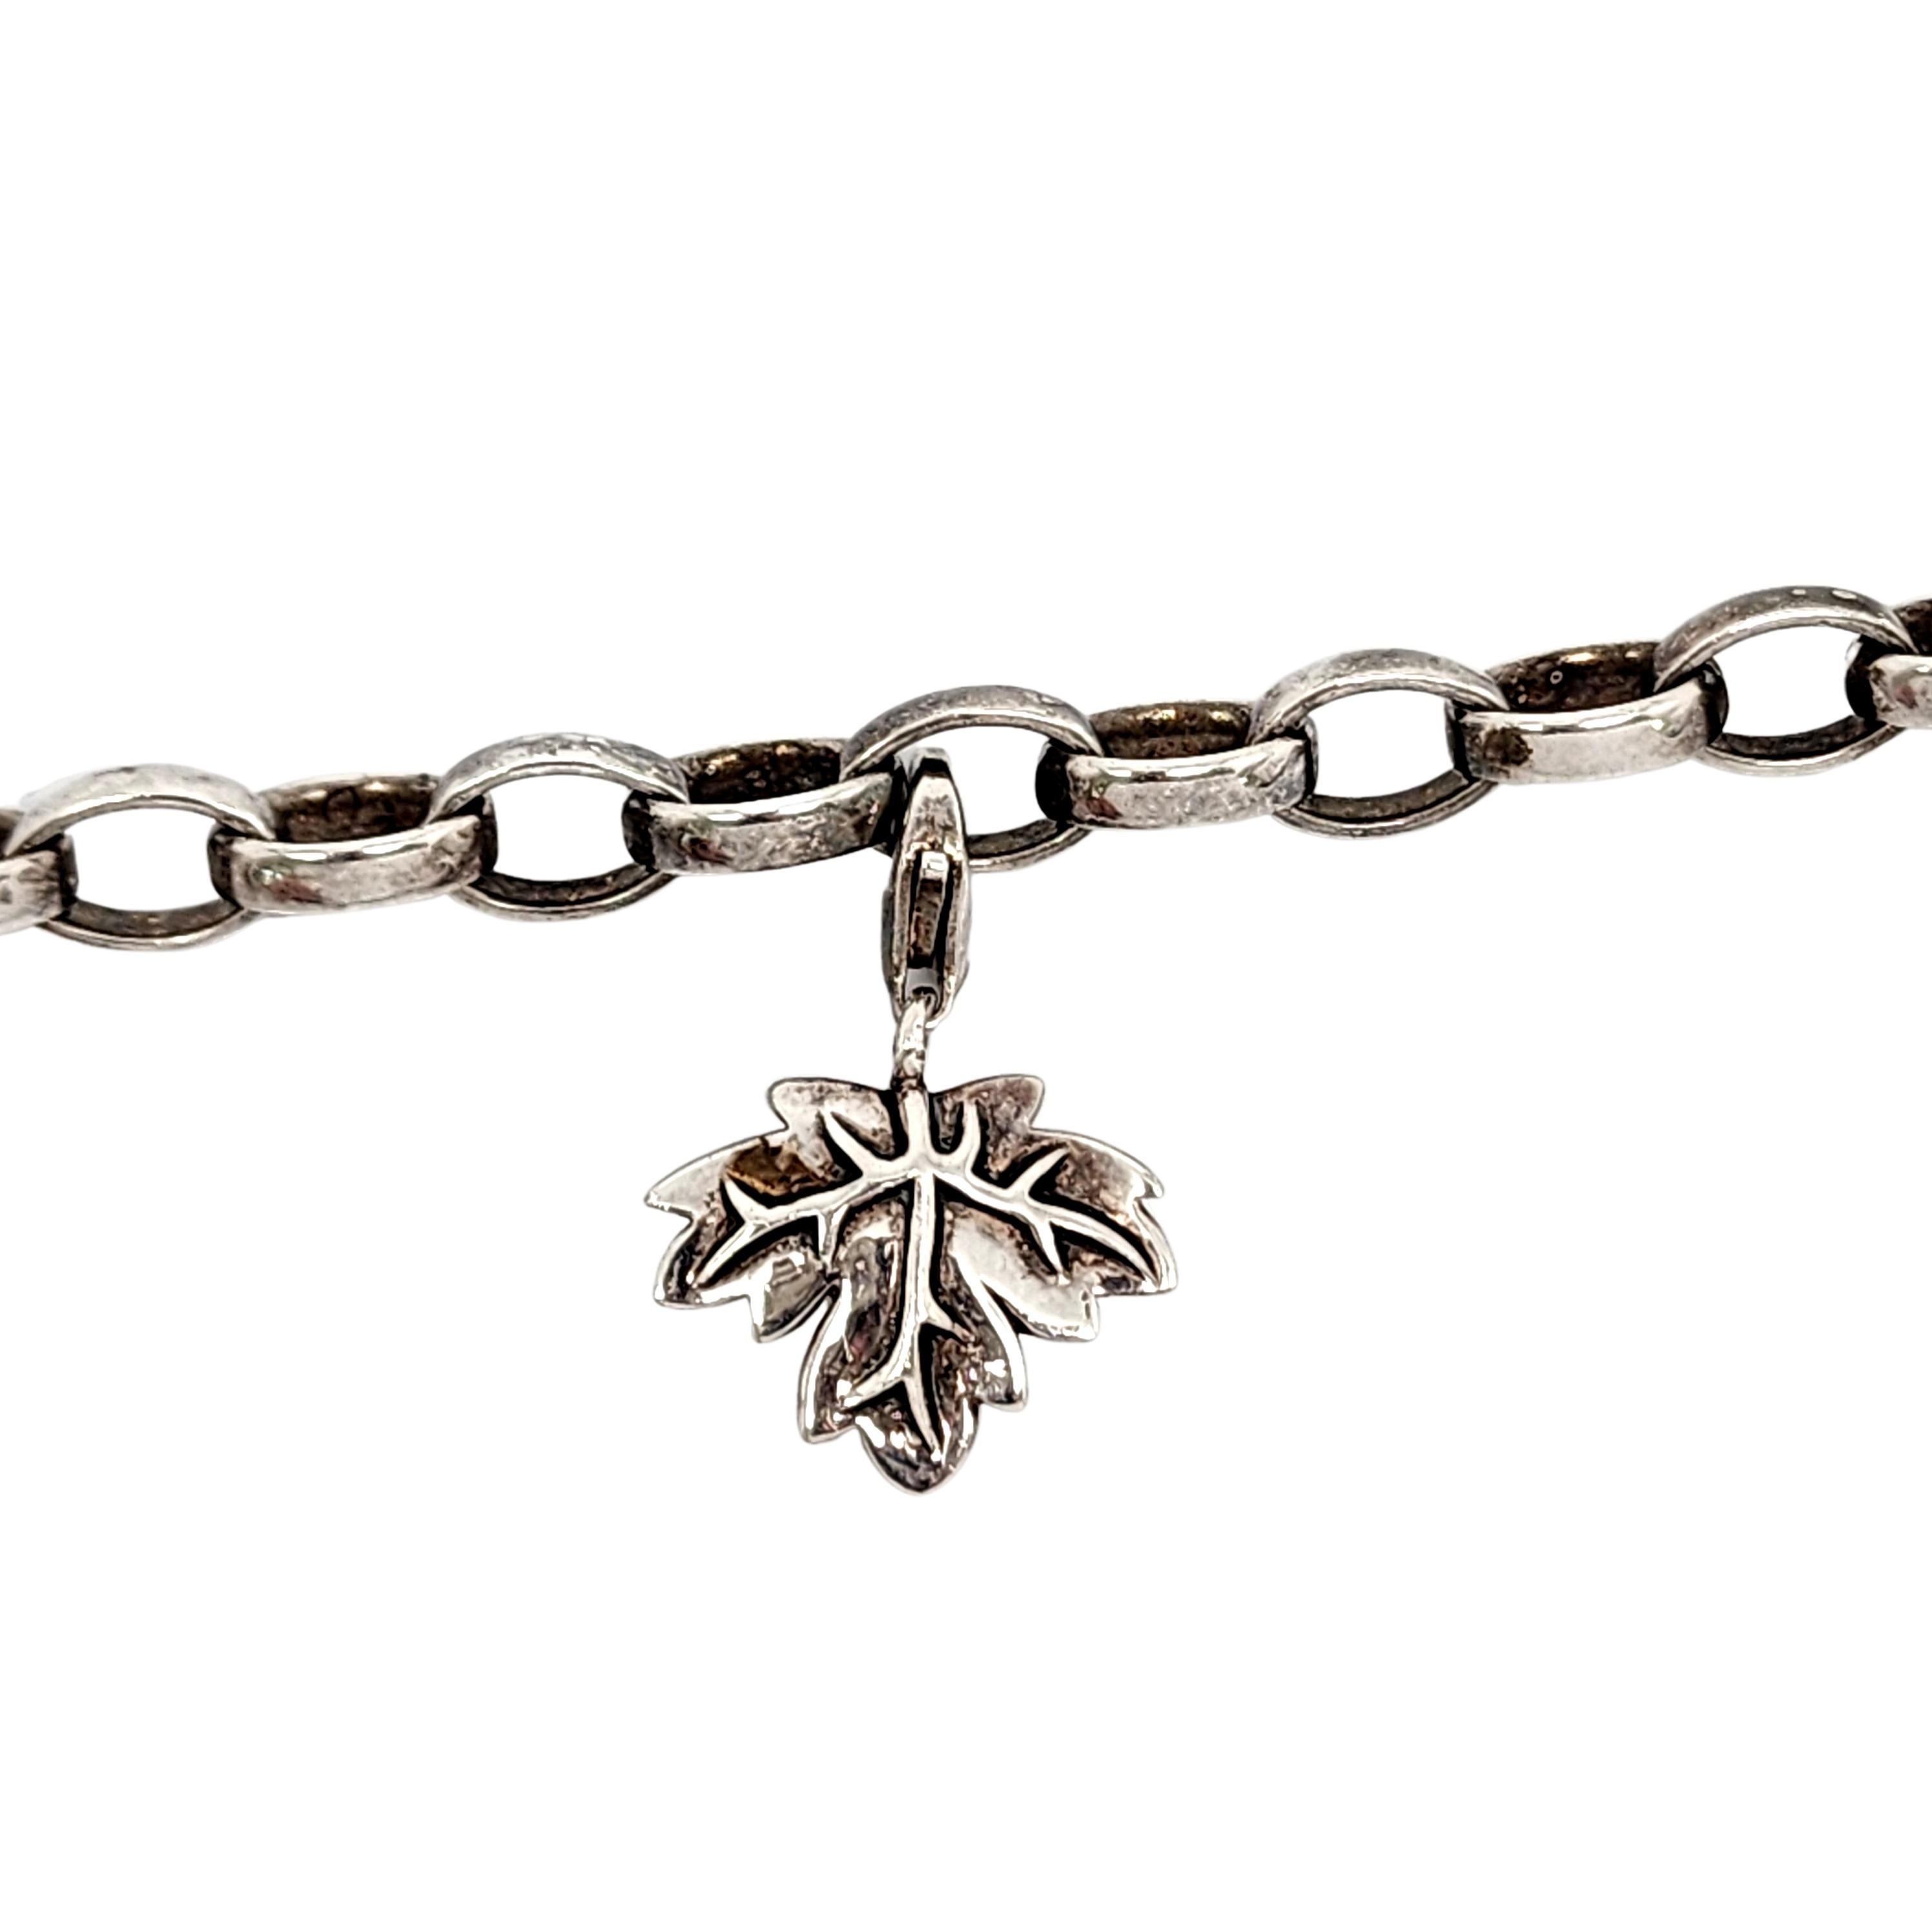 Women's Thomas Sabo Charm Club SS Bracelet with Soccer Ball and Leaf Charms #14459 For Sale